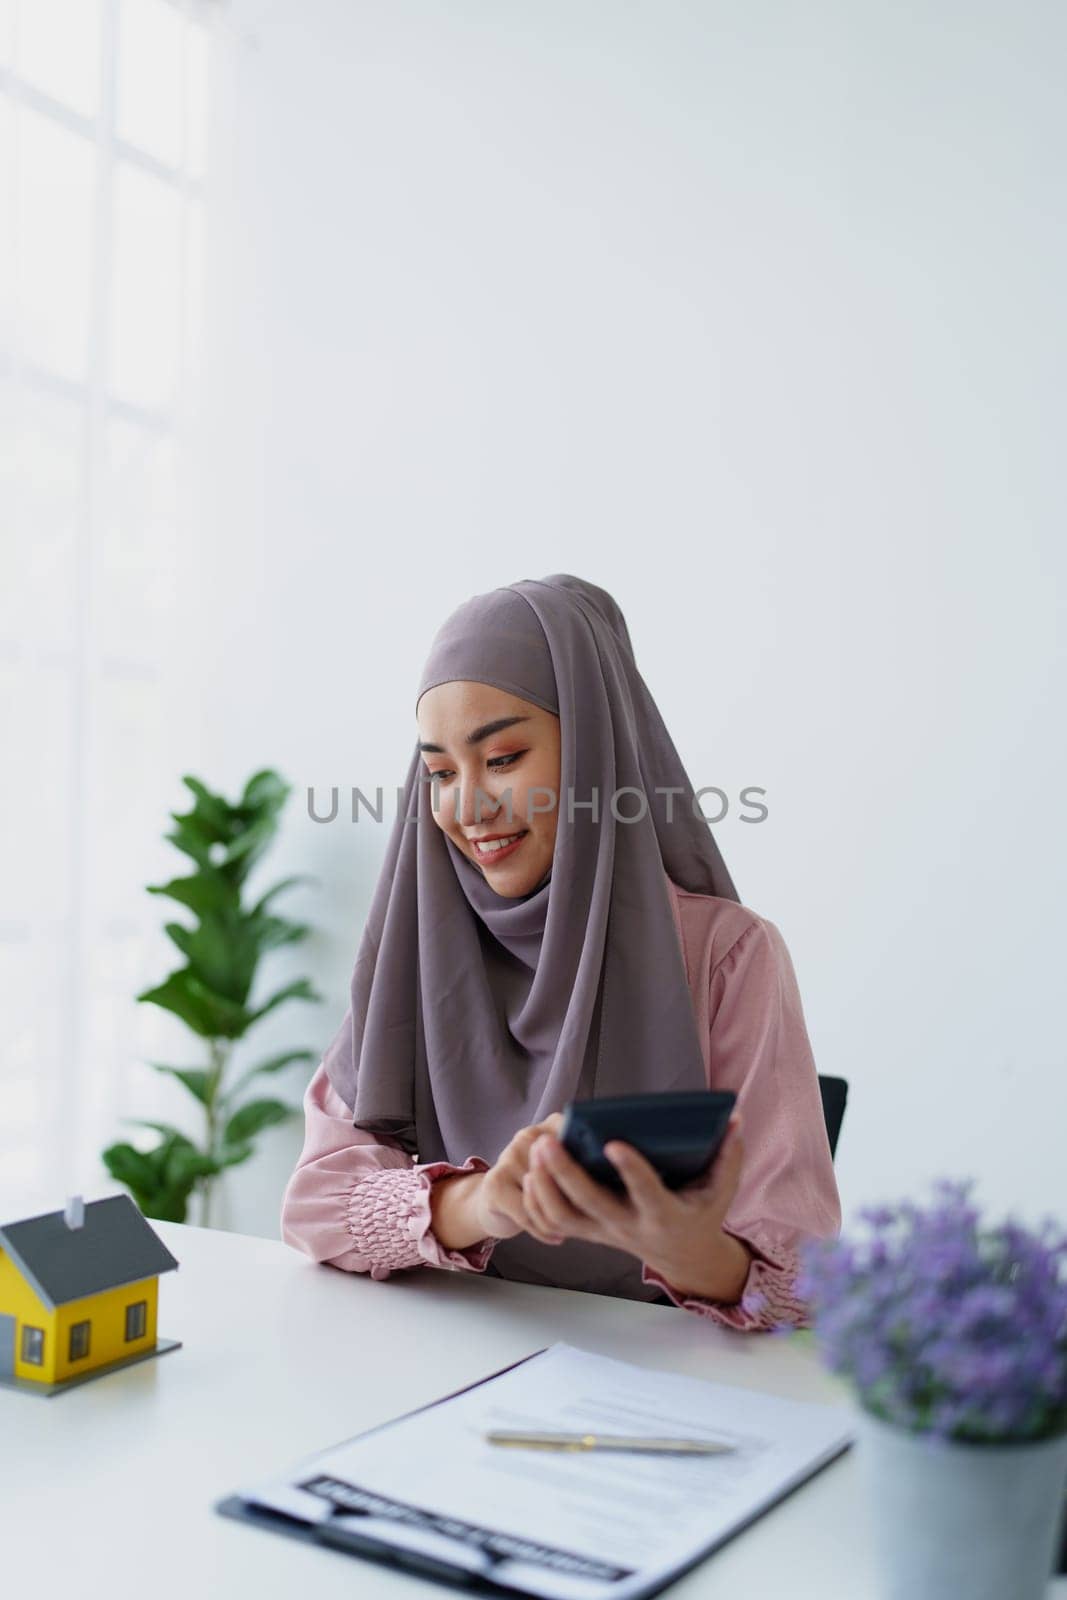 muslim woman with hijab using calculator focus on utility bills calculate check credit card receipt monthly expense. by Manastrong